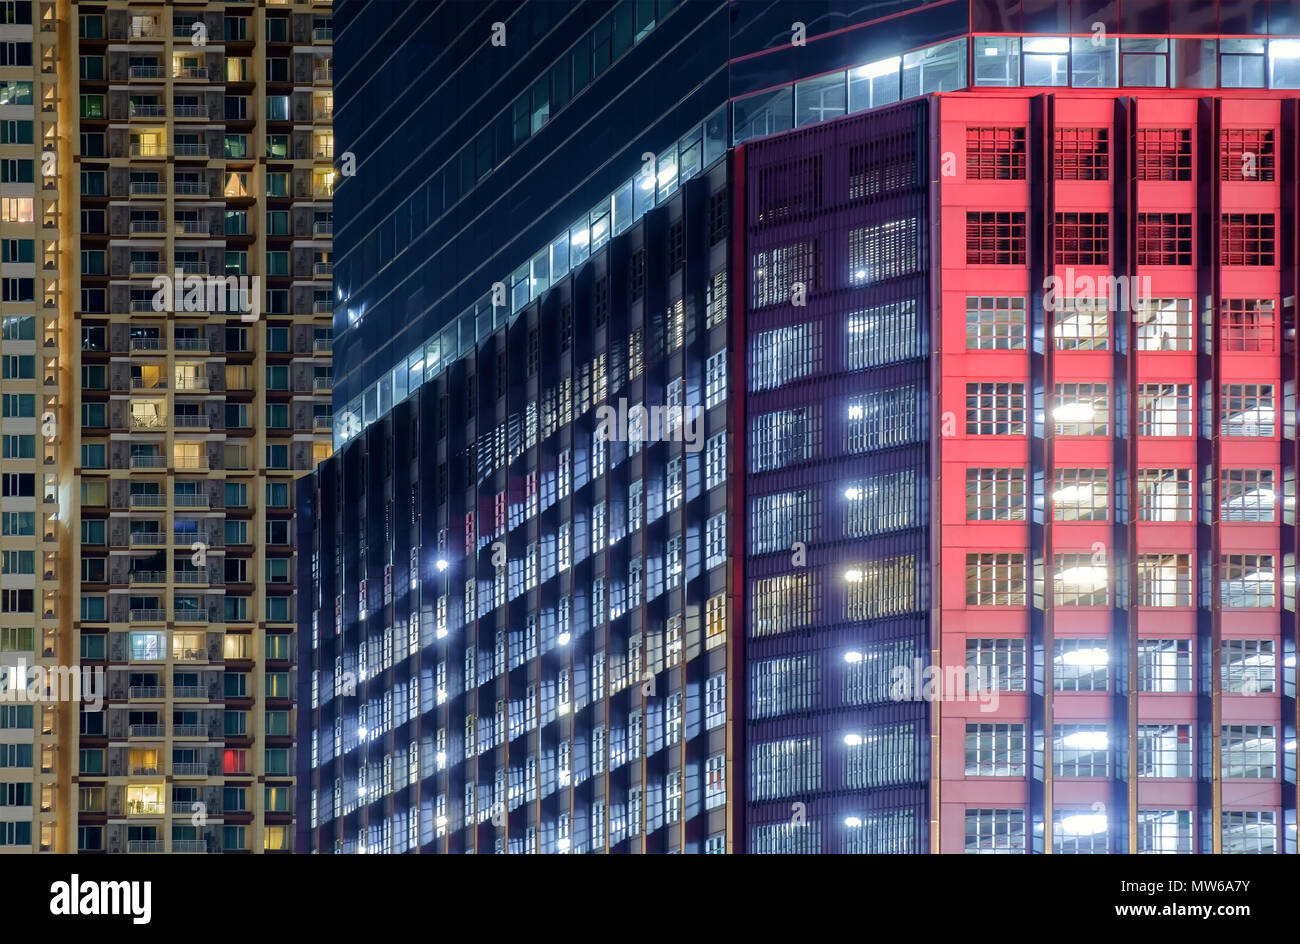 View of balconies of apartment building at night. Stock Photo